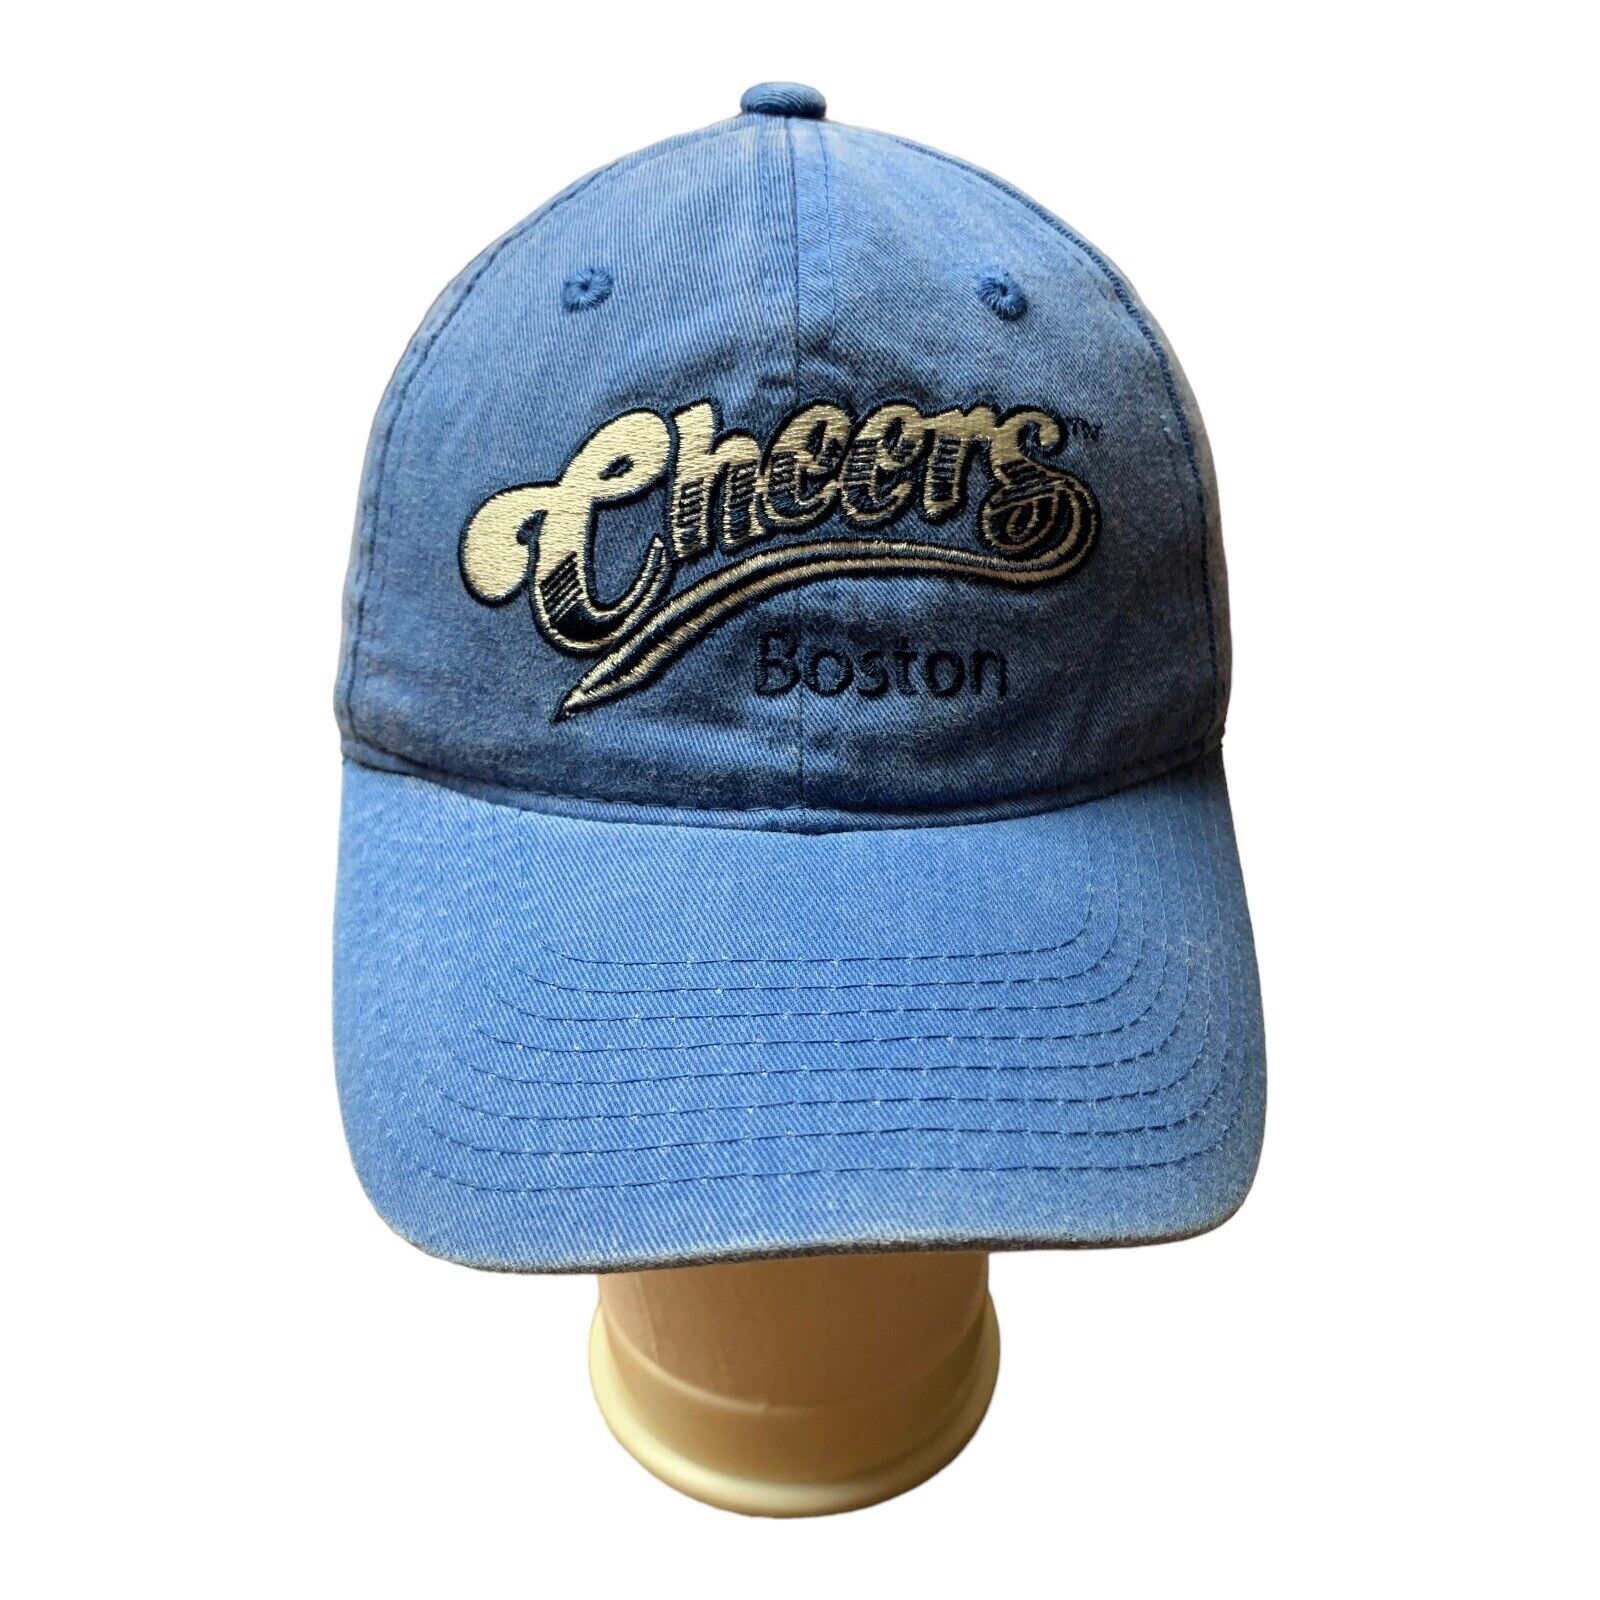 CHEERS Boston Hat Mens Blue Script Cap Strap Back Tavern TV Officially Licensed